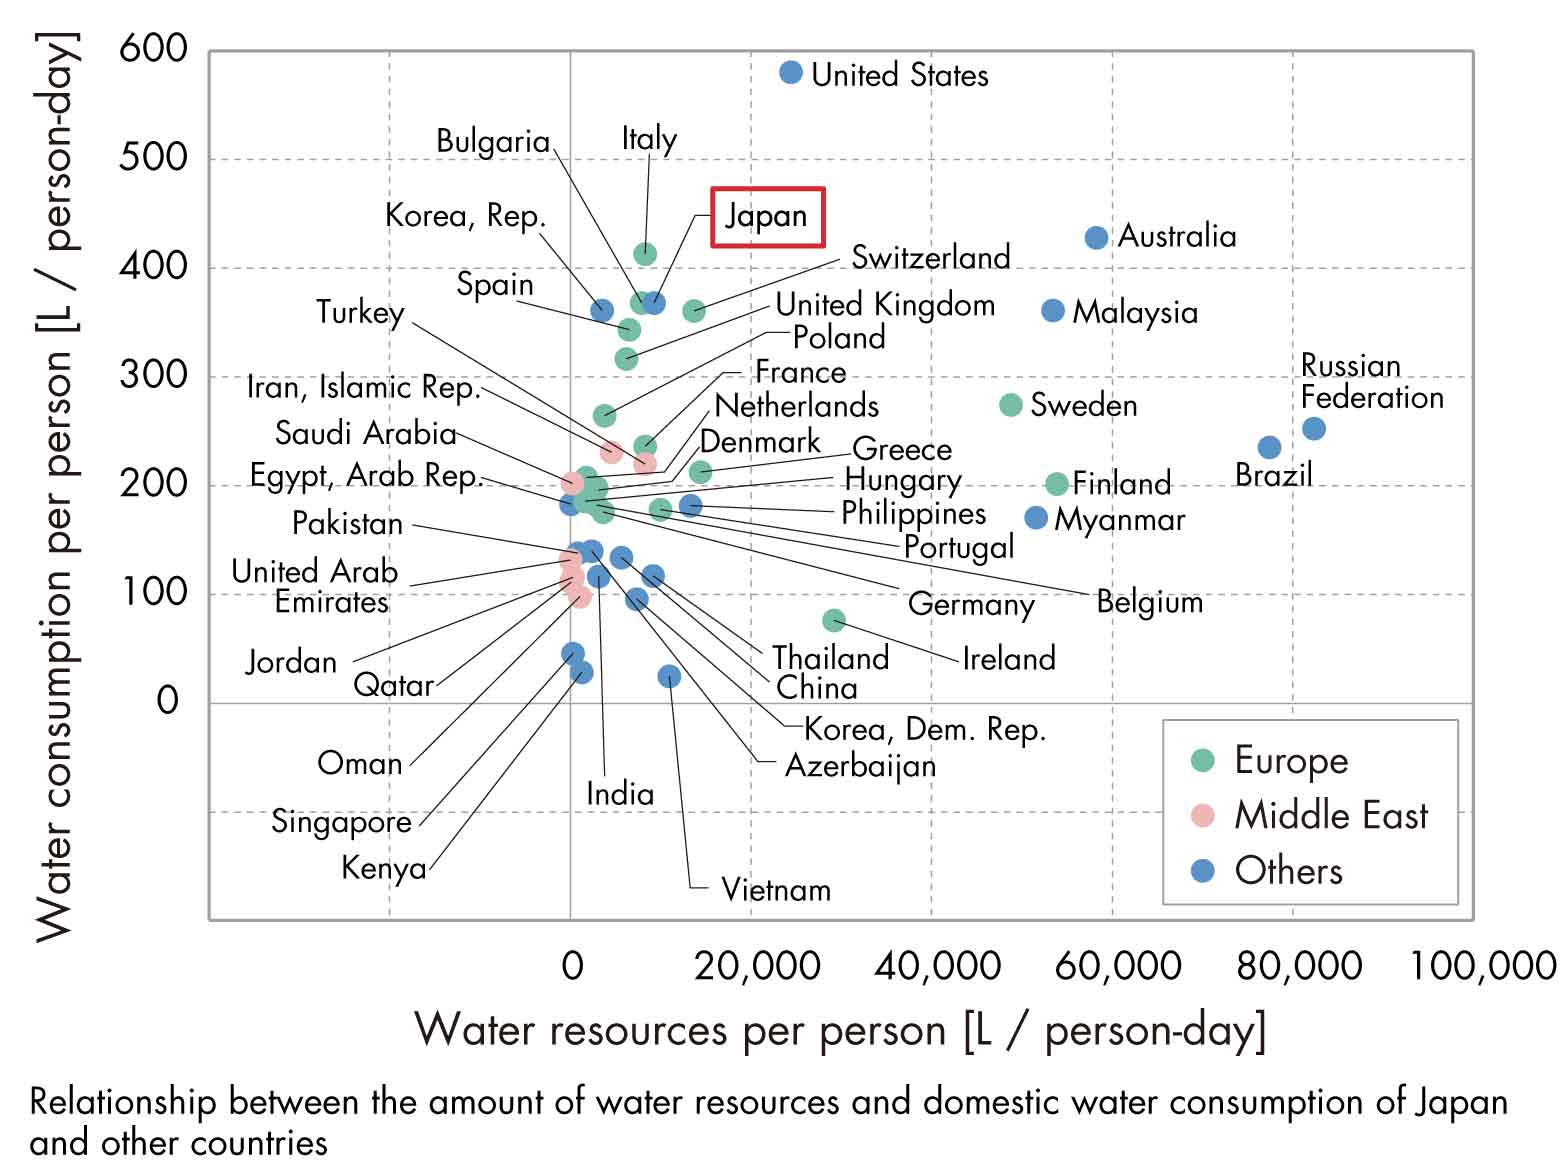 Relationship between the amount of water resources and domestic water consumption of Japan and other countries